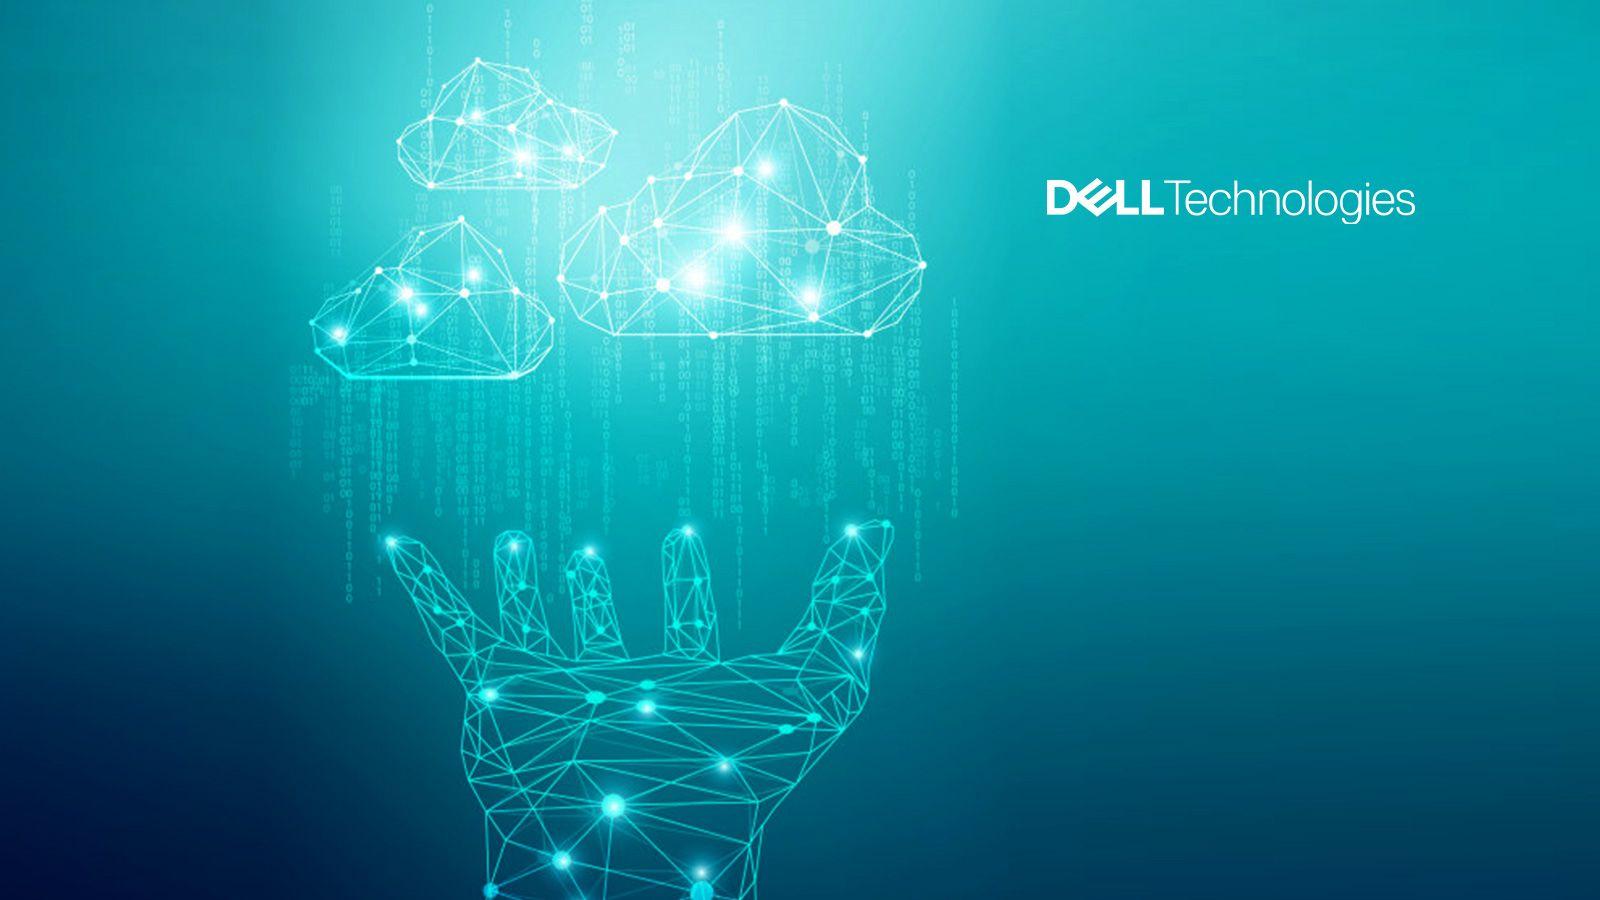 Dell Technologies Wallpapers Top Free Dell Technologies Backgrounds Wallpaperaccess